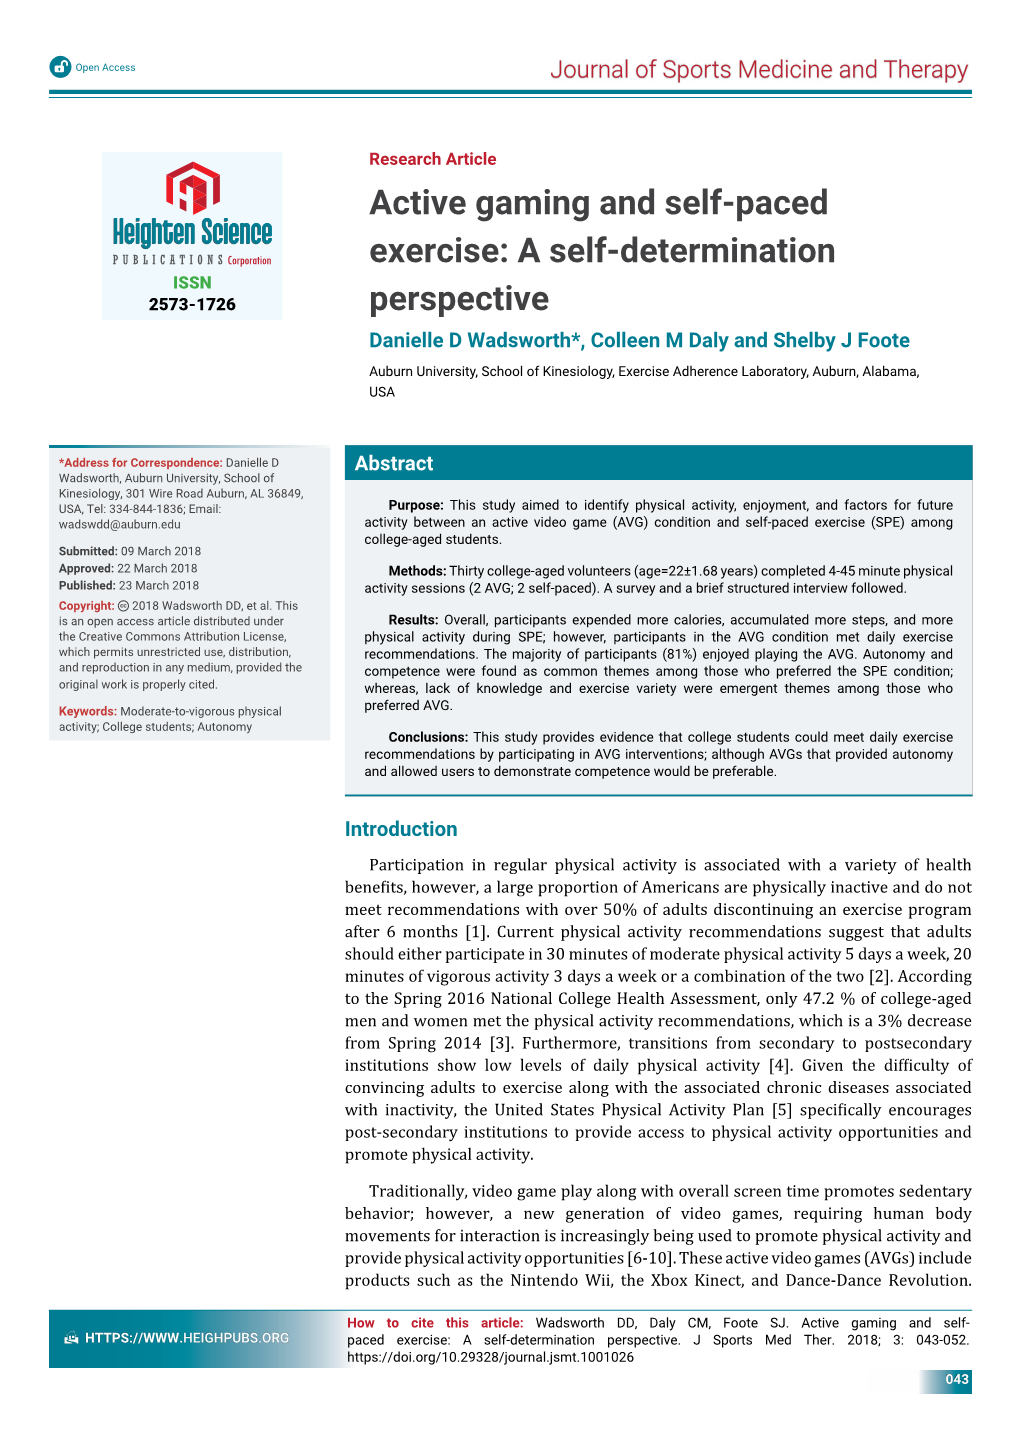 Active Gaming and Self-Paced Exercise: a Self-Determination